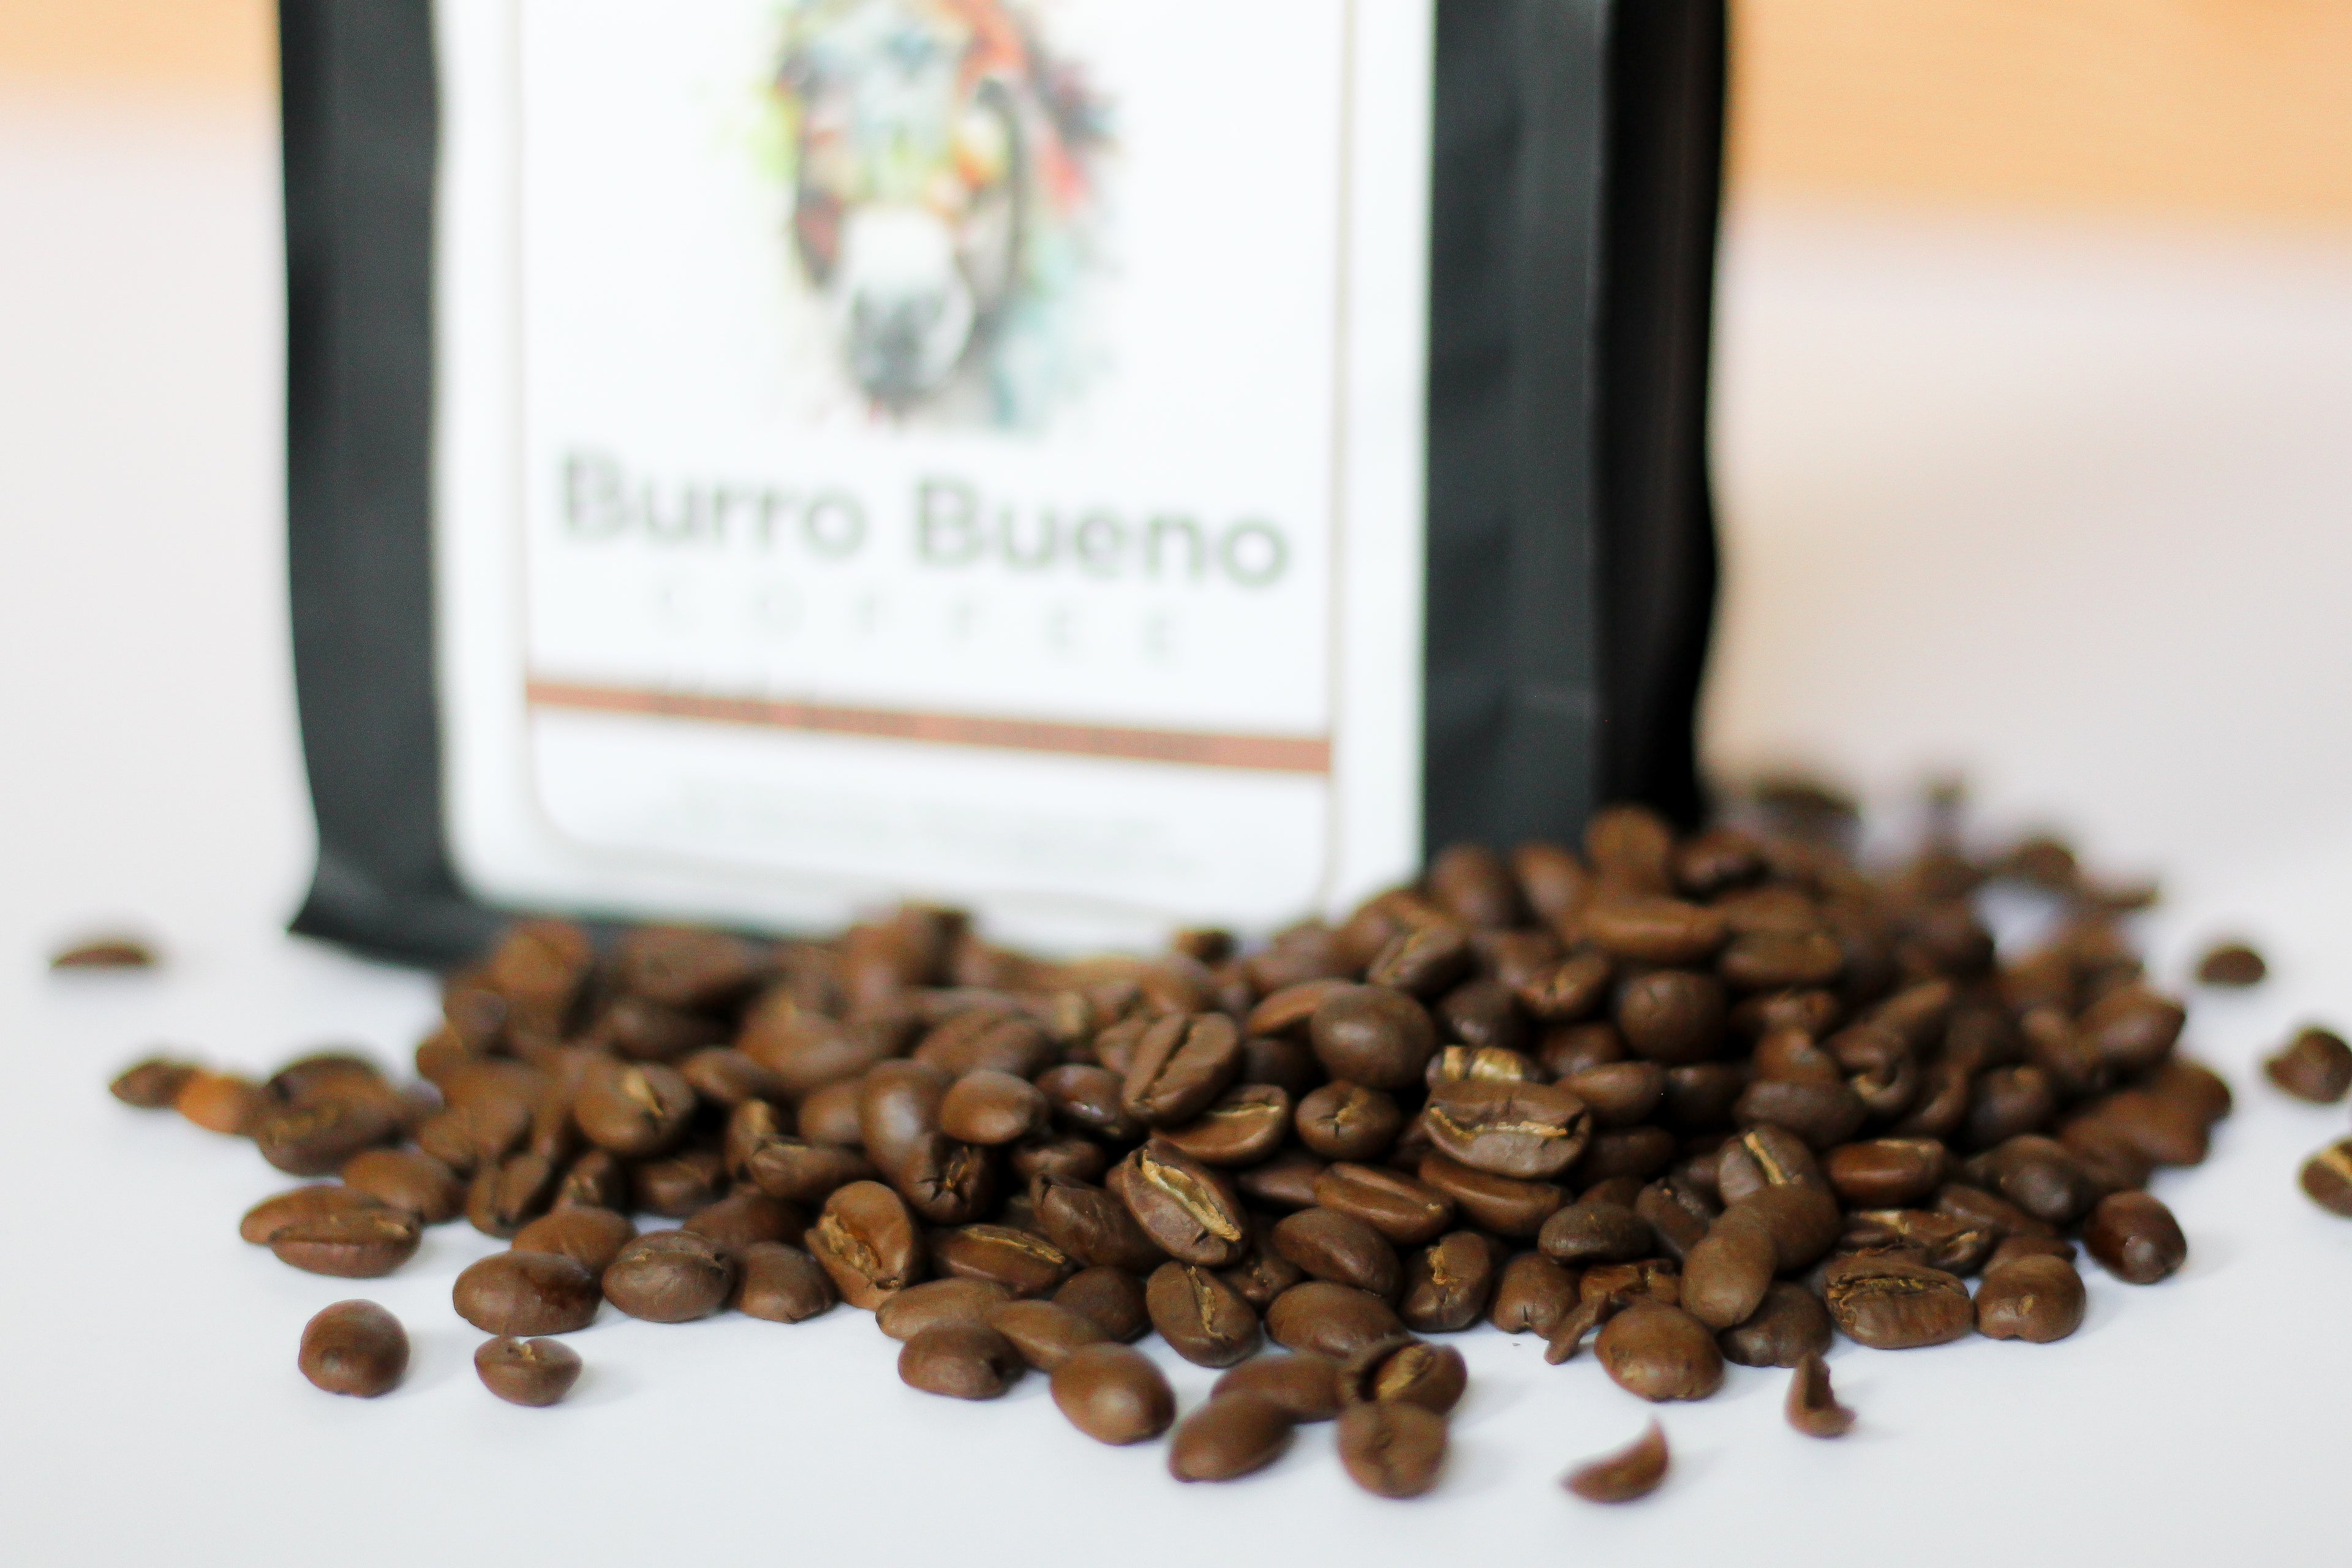 Burro Bueno Coffee beans, harvested from the cloud kissed mountains of Honduras